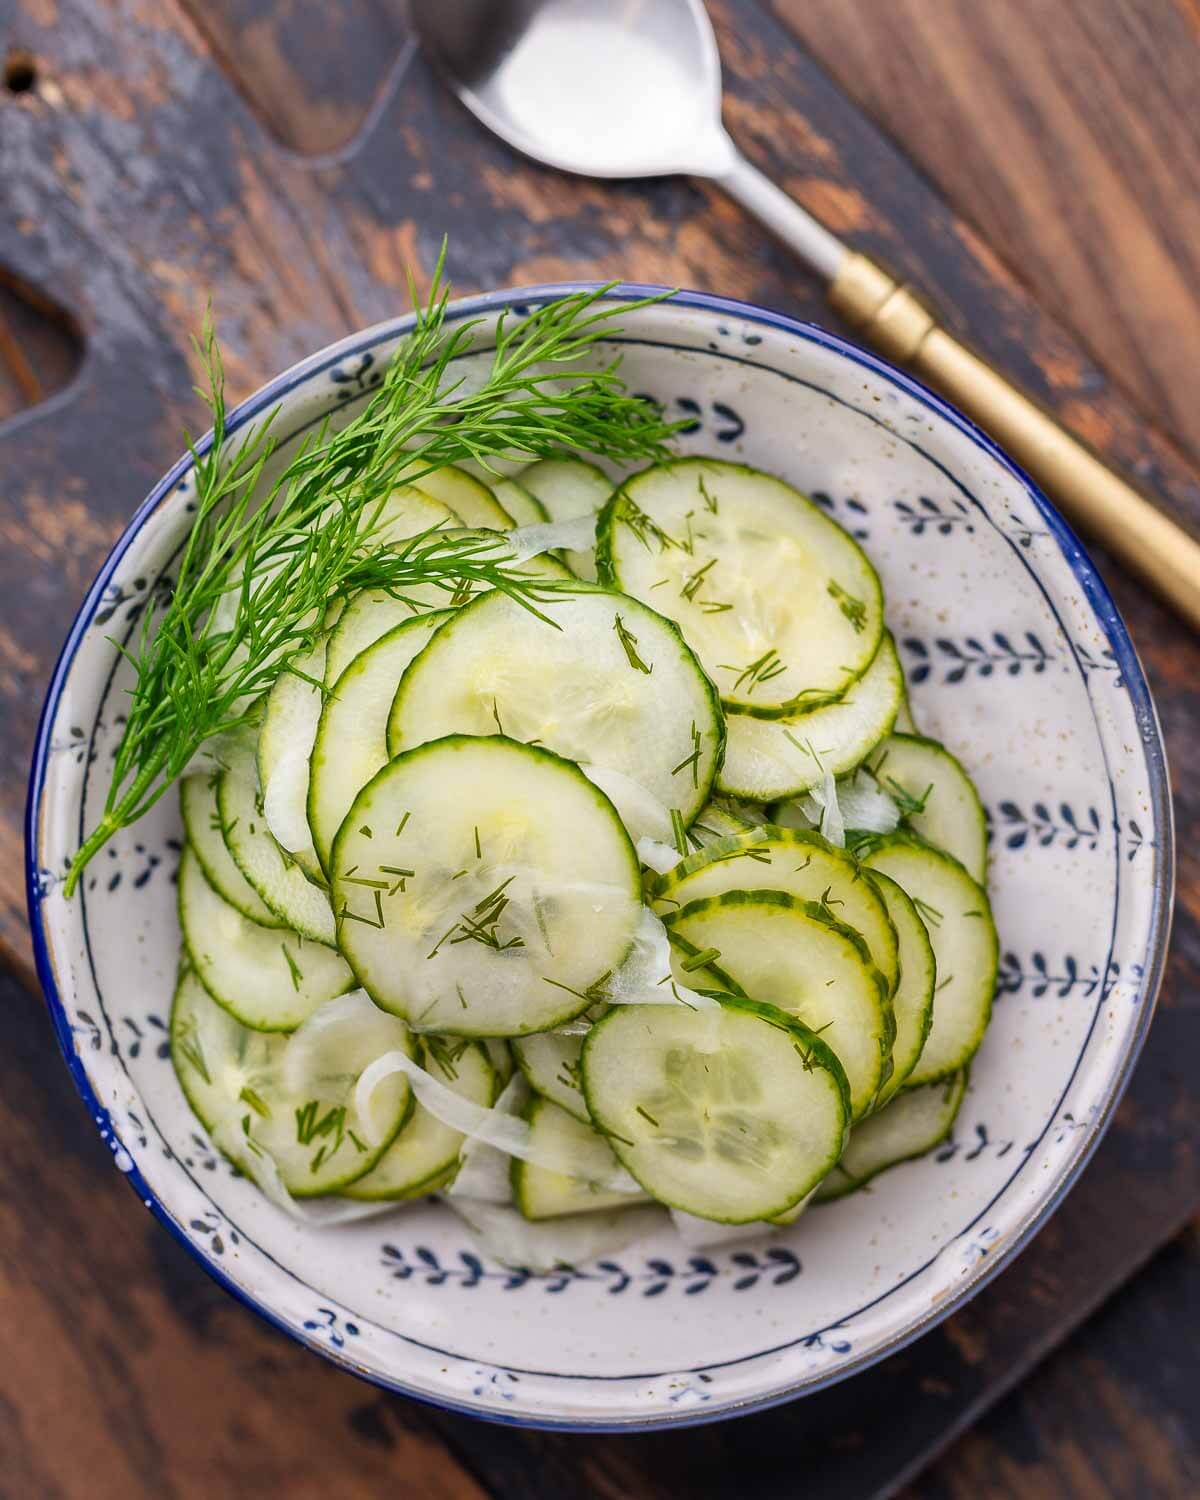 Closeup shot of cucumber salad in blue and white bowl with dill garnish.